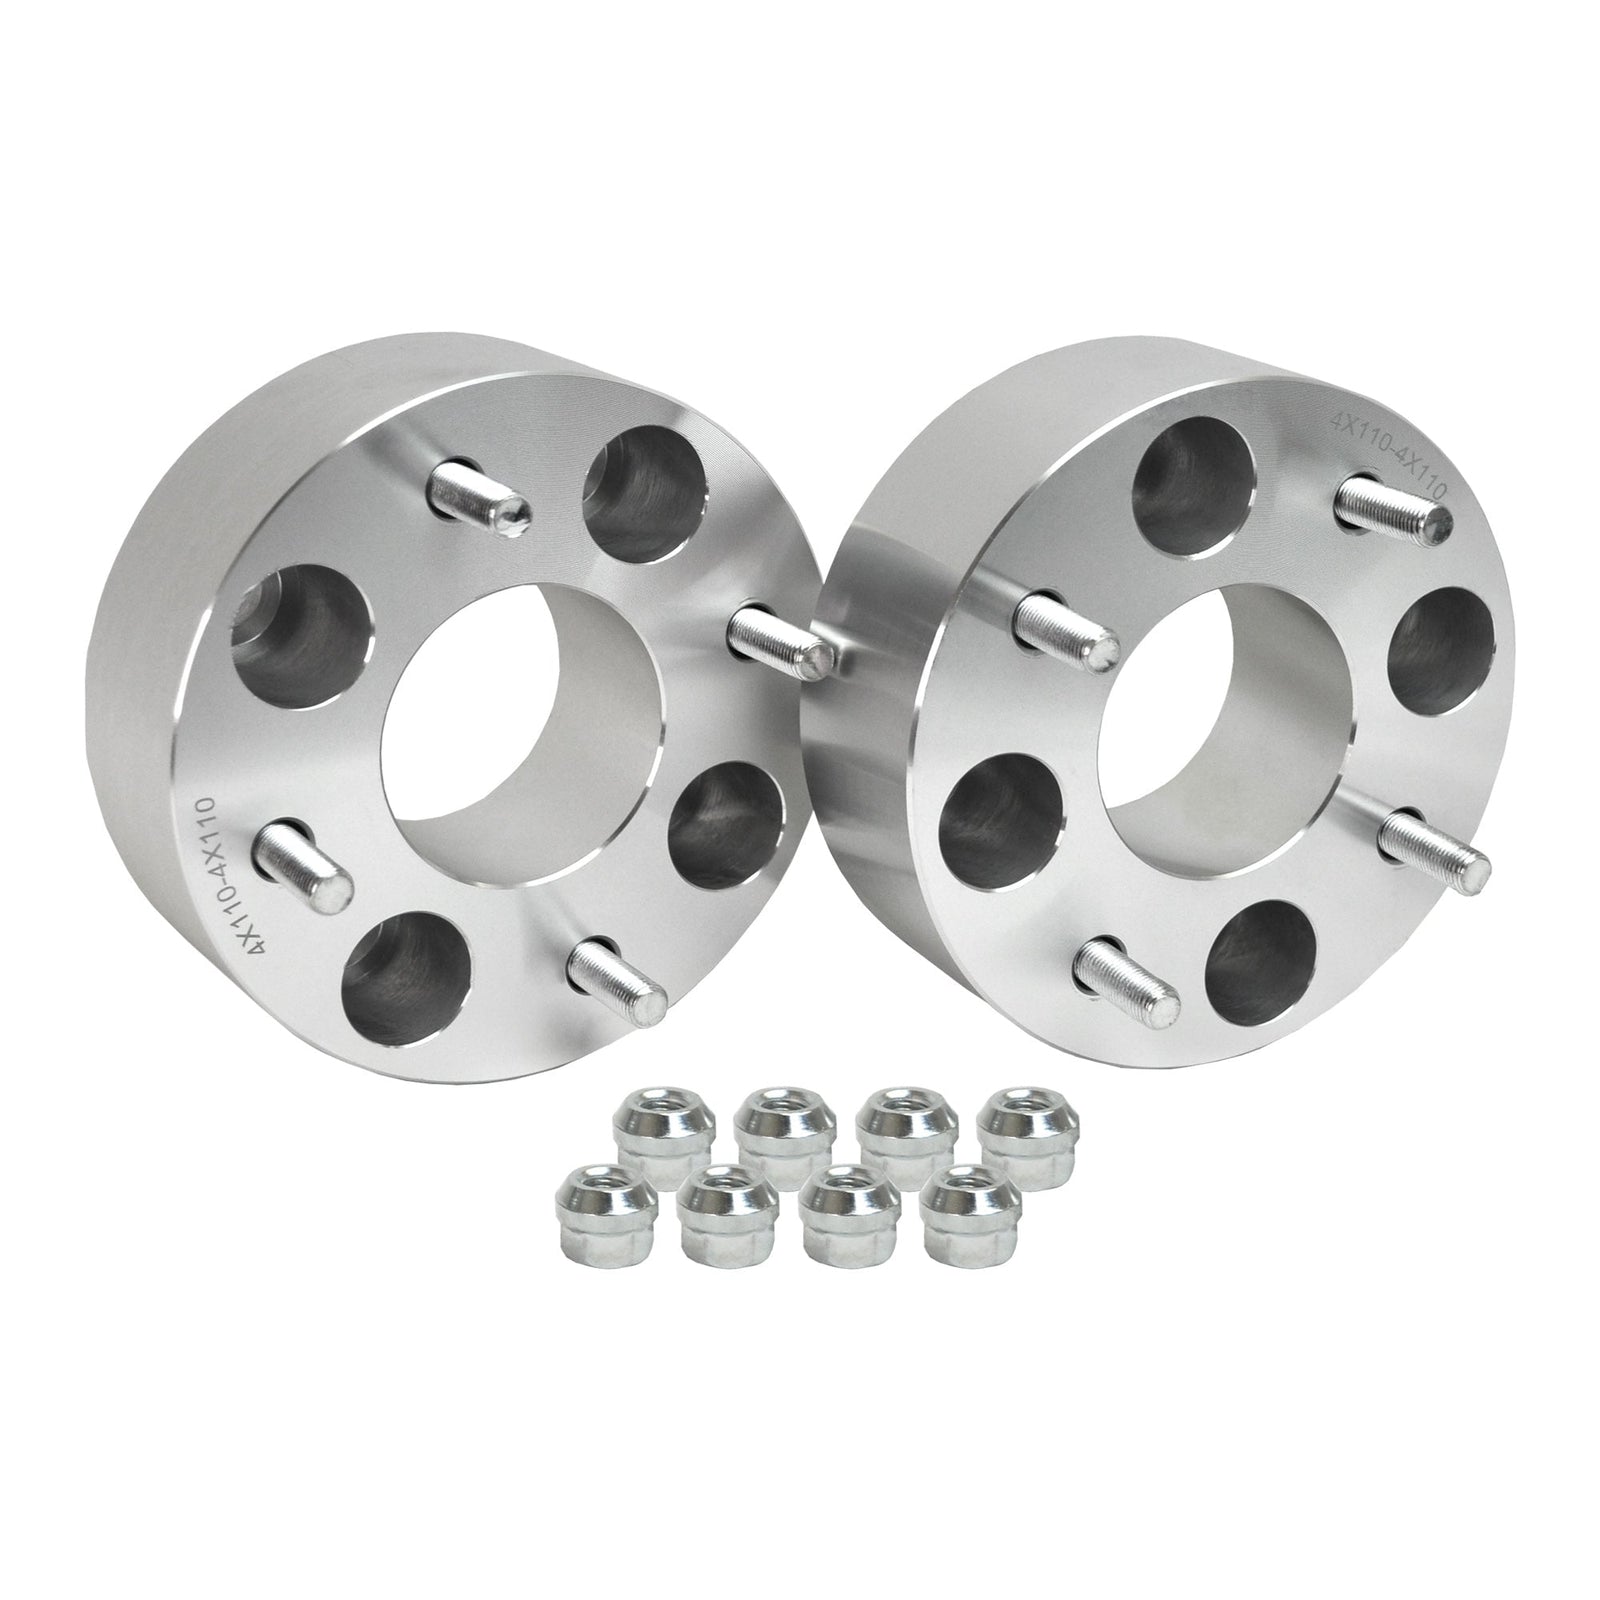 CFMOTO ZFORCE 500 Rugged Wheel Spacer